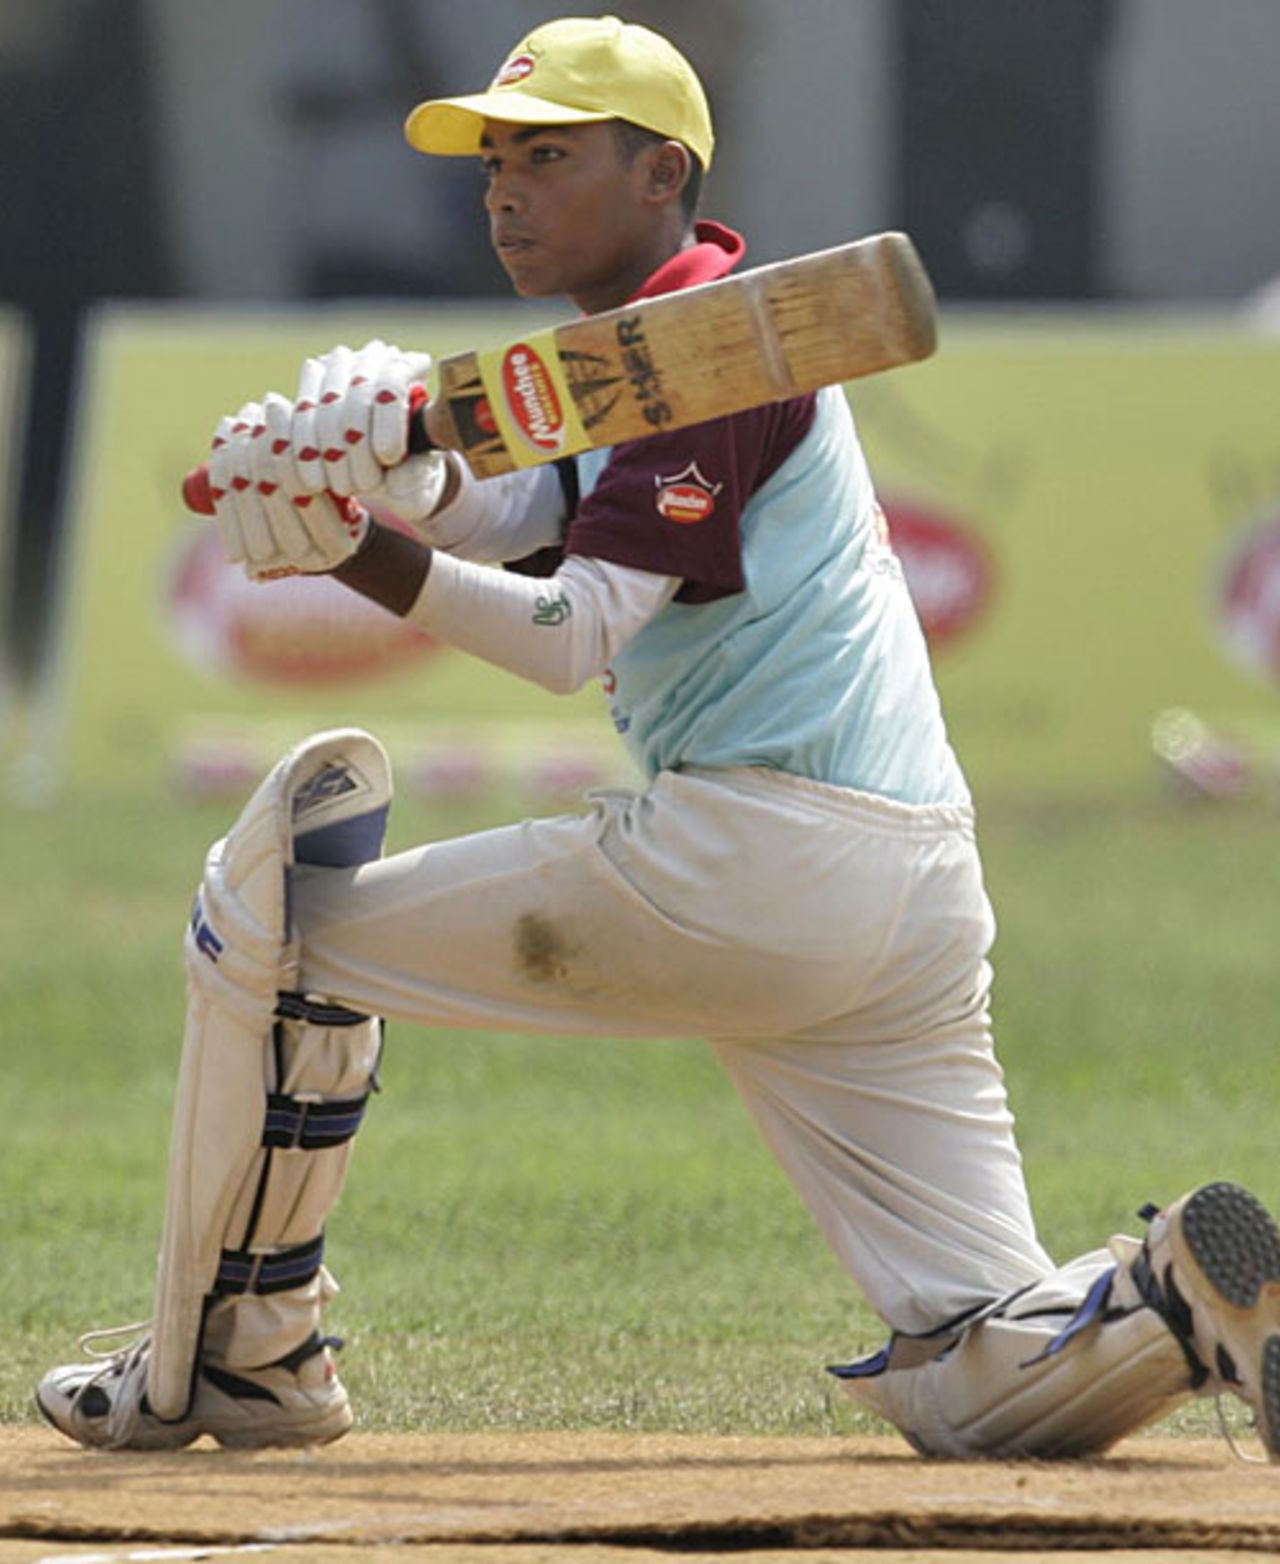 Akshu Fernando sweeps, St Peters College v Richmond College, Glucofit Cricket Sixes, Colombo, October 18, 2009